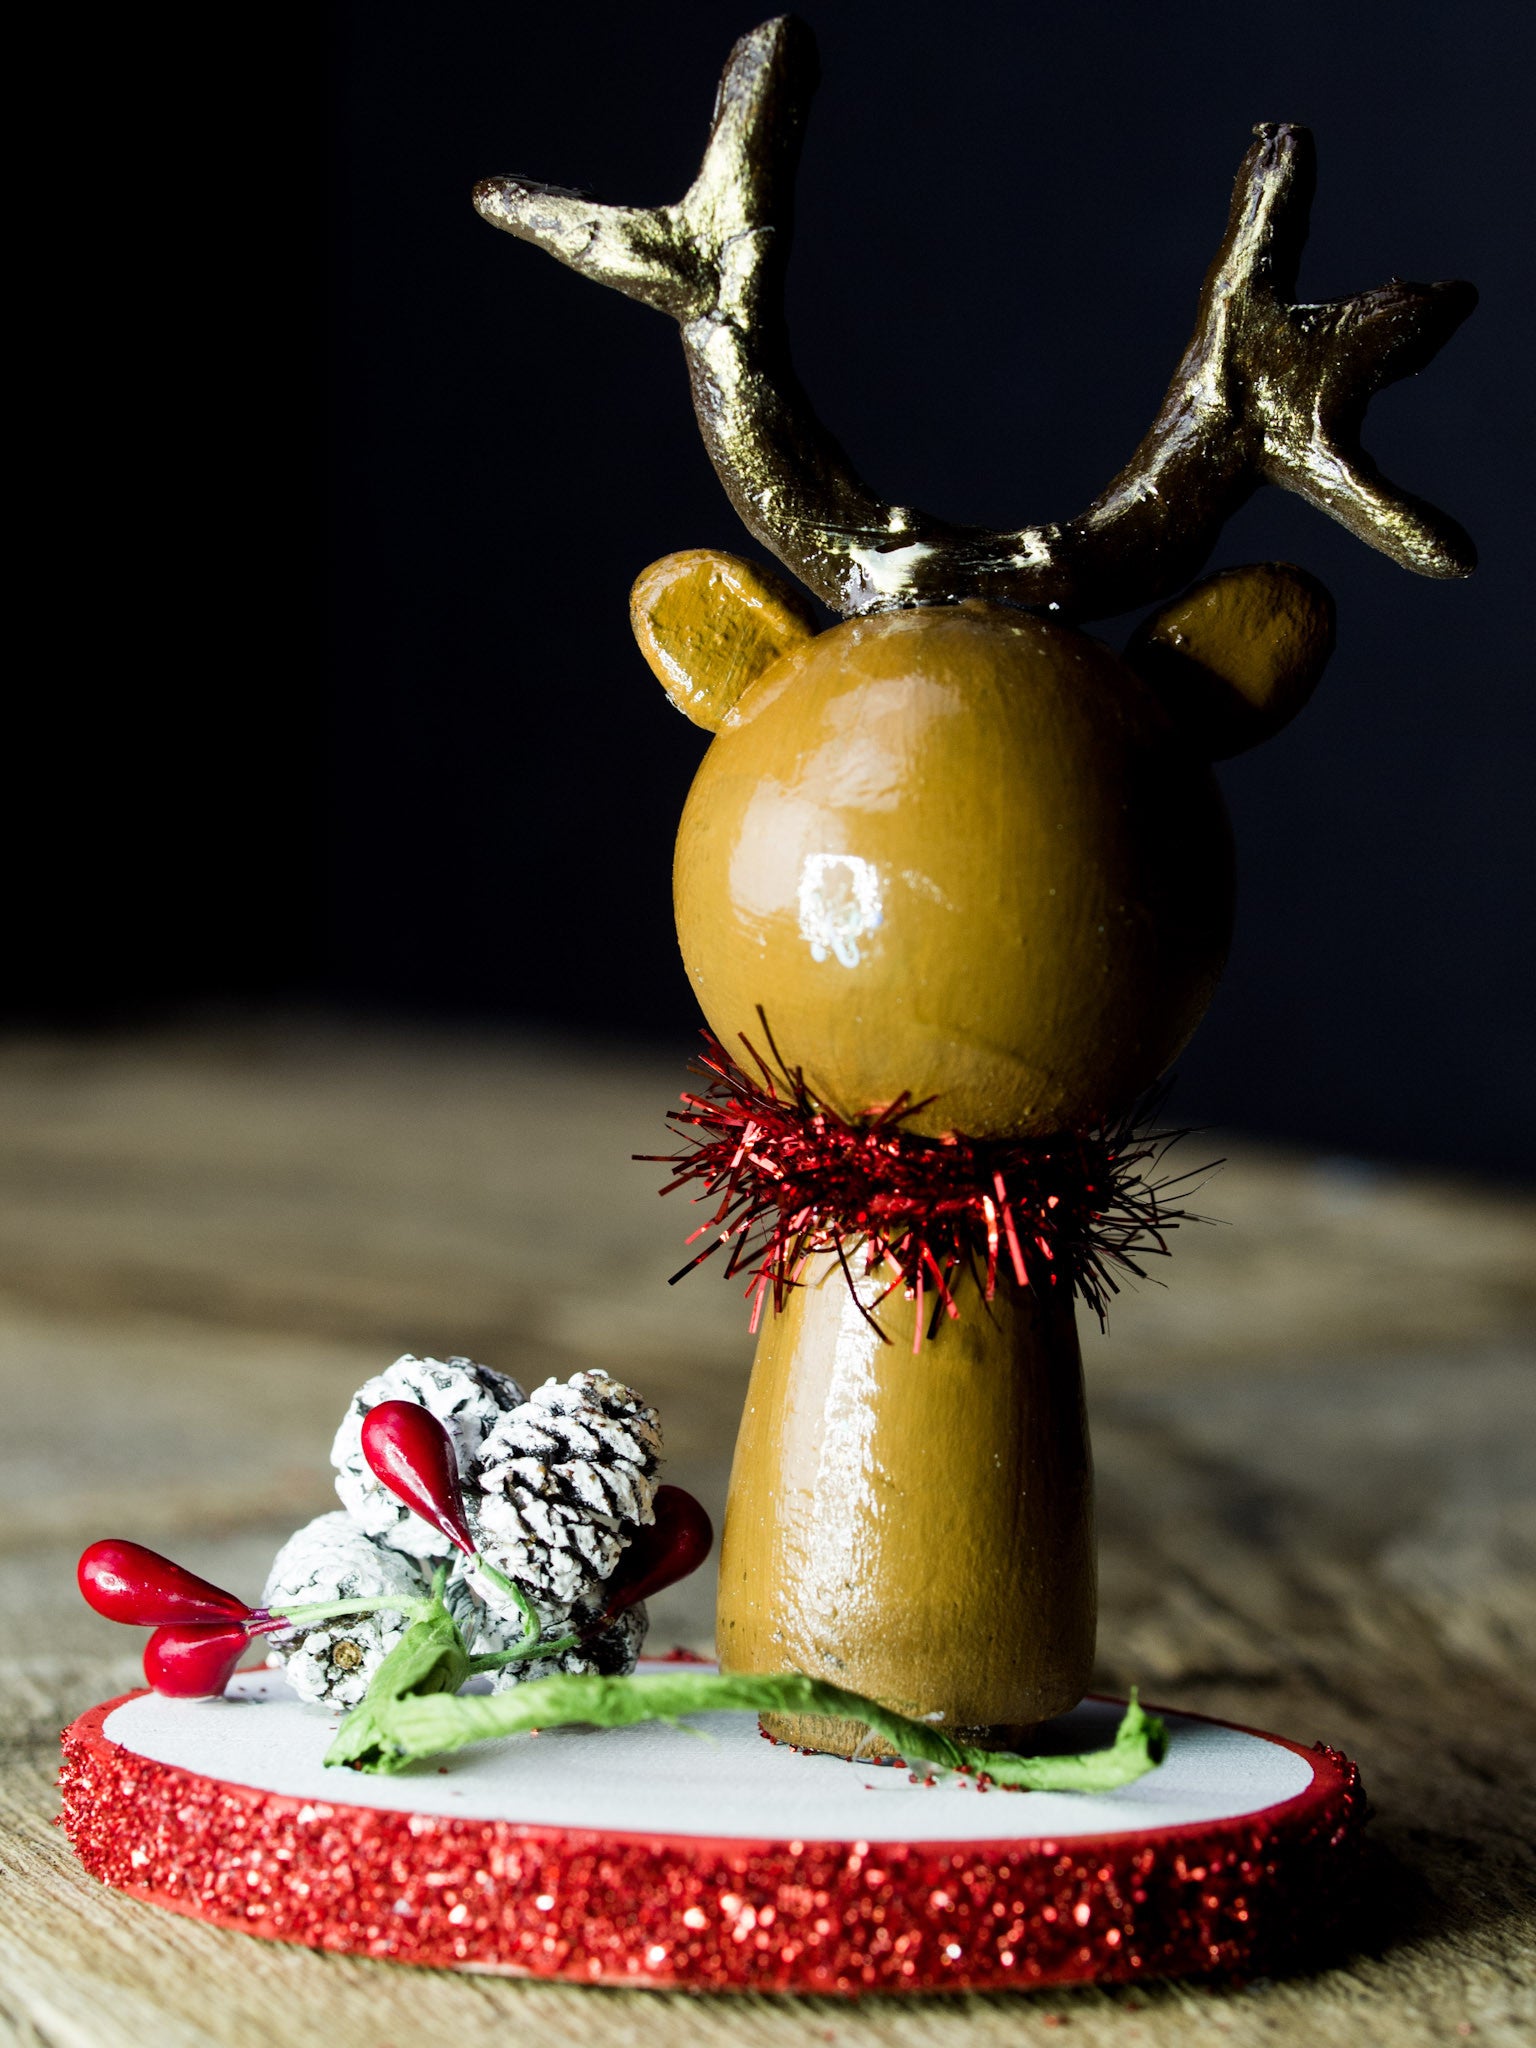 Rudolph the red nosed reindeer, a holiday wood kokeshi art doll created by Danita Art